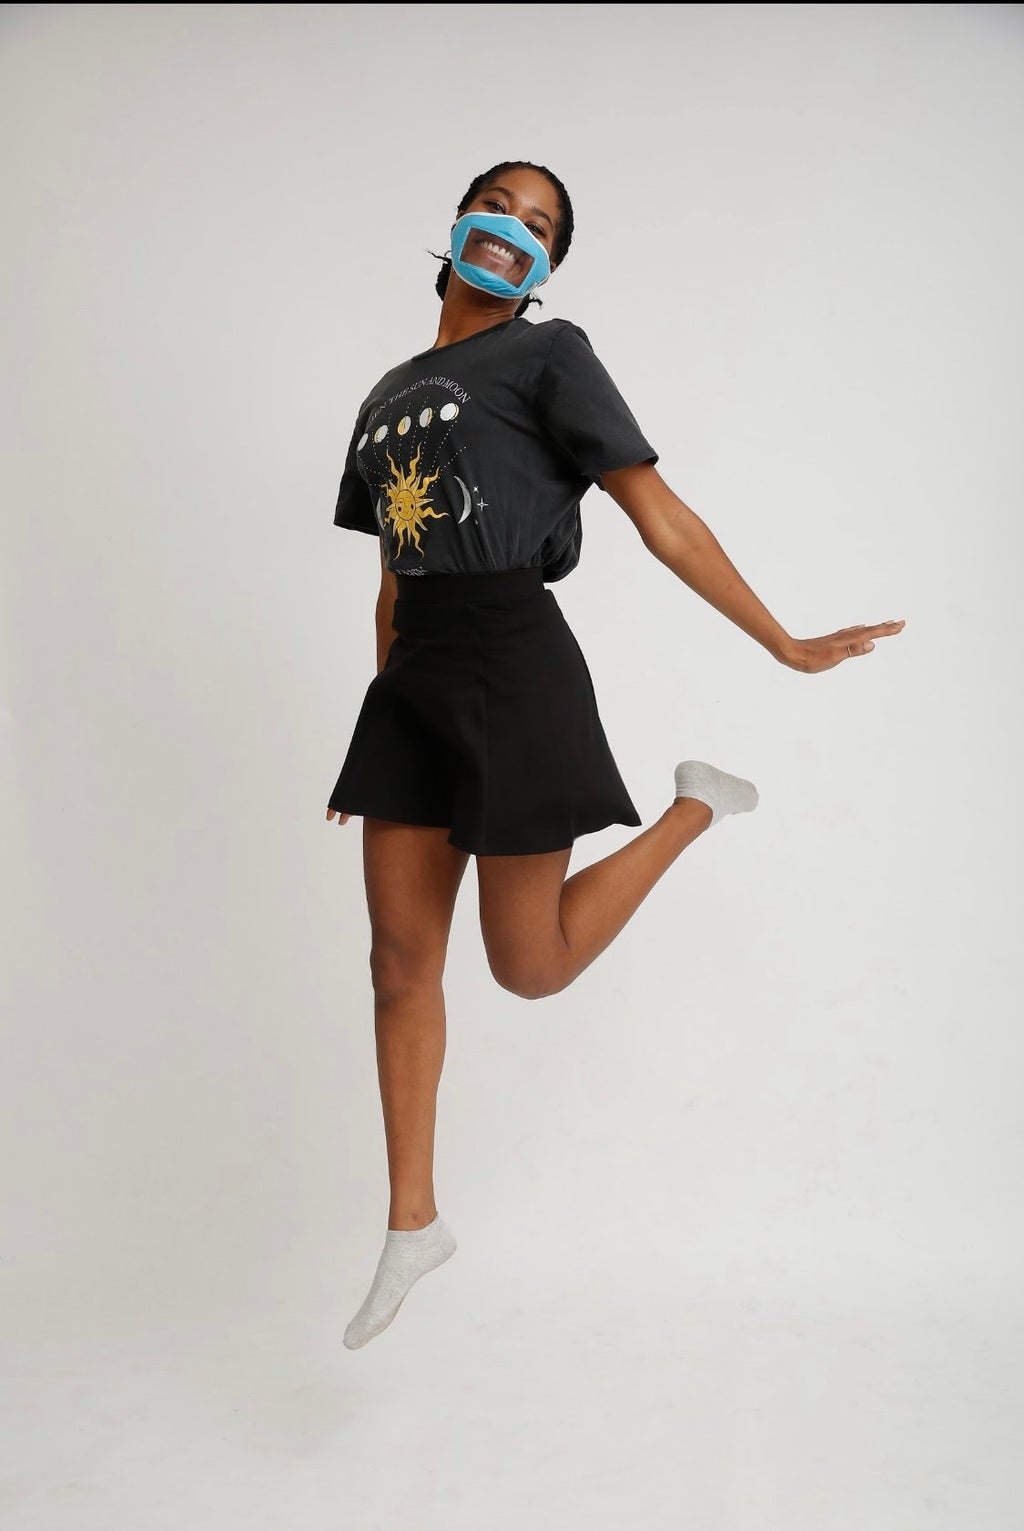 Girl jumping with smile mask